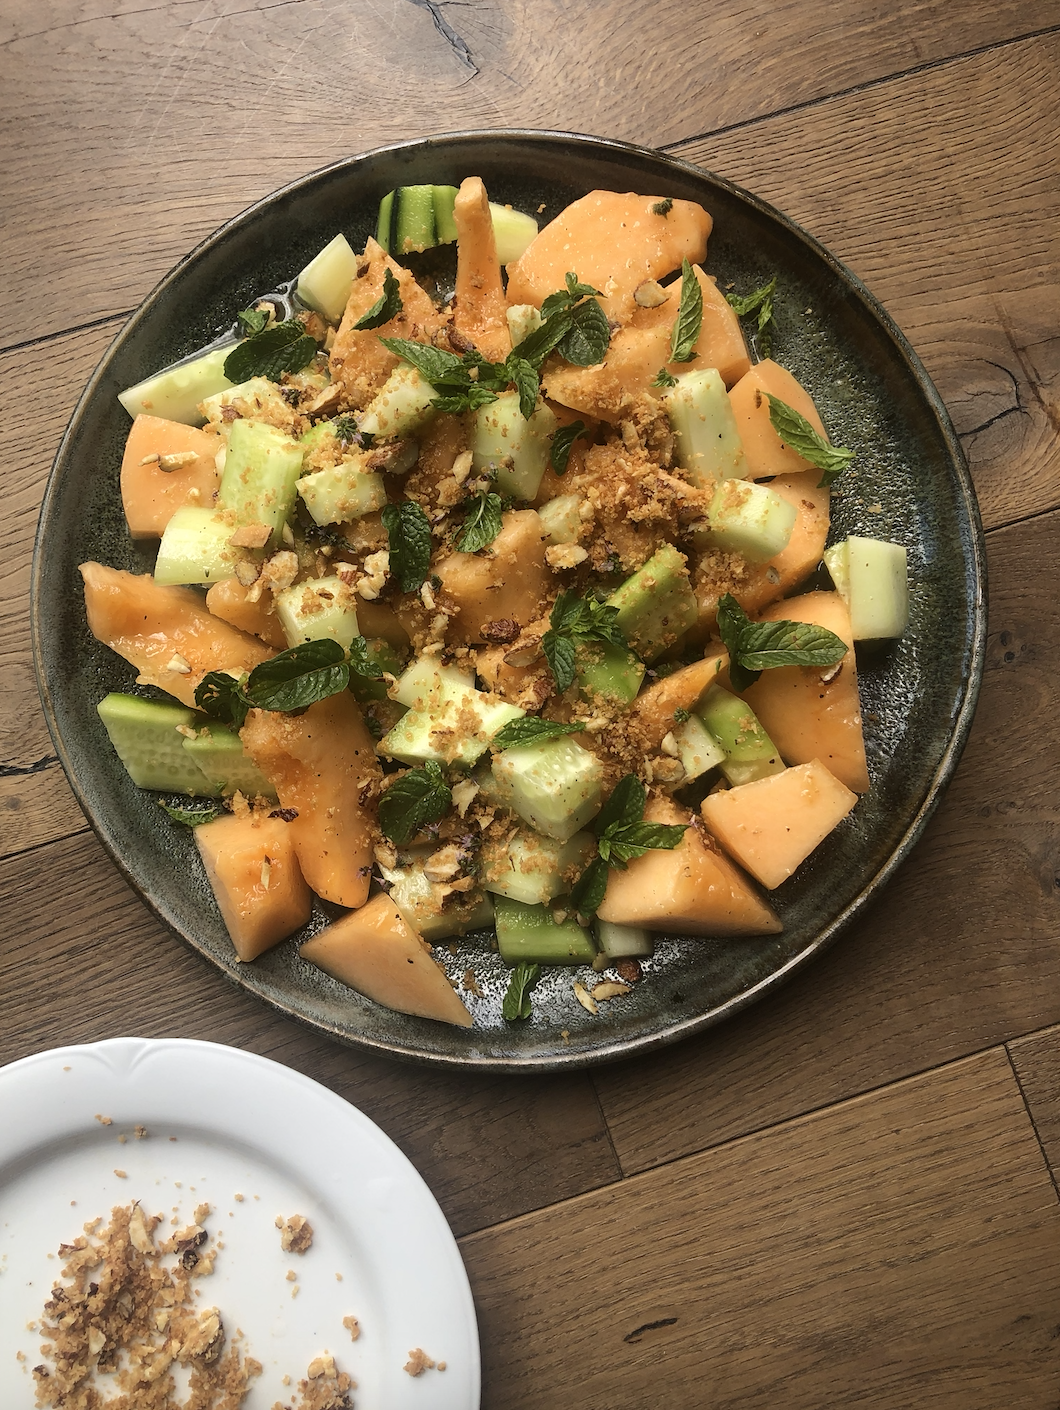 A plate of Melon and Cucumber Salad decorated with mint leaves and ground almonds, from a recipe by Sami Tamimi.